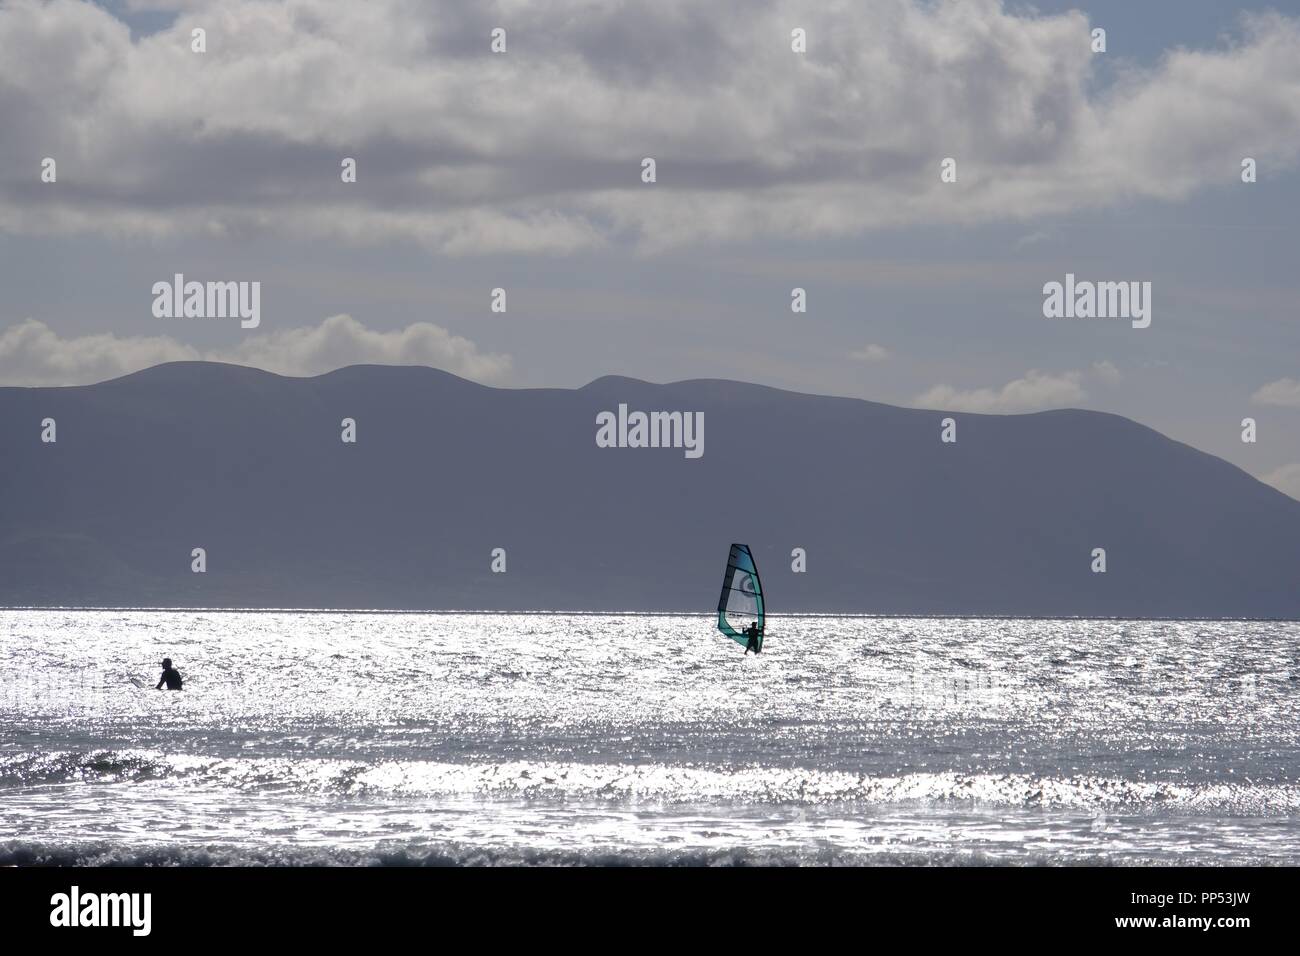 Inch Beach,The Dingle, County Kerry, Ireland. 23 September 2018 After days of storms and heavy rain visitors and residents enjoy a sunny but blustery day on Inch Beach on Ireland’s Dingle Peninsula in County Kerry. Credit: Tom Corban/Alamy Live News Stock Photo